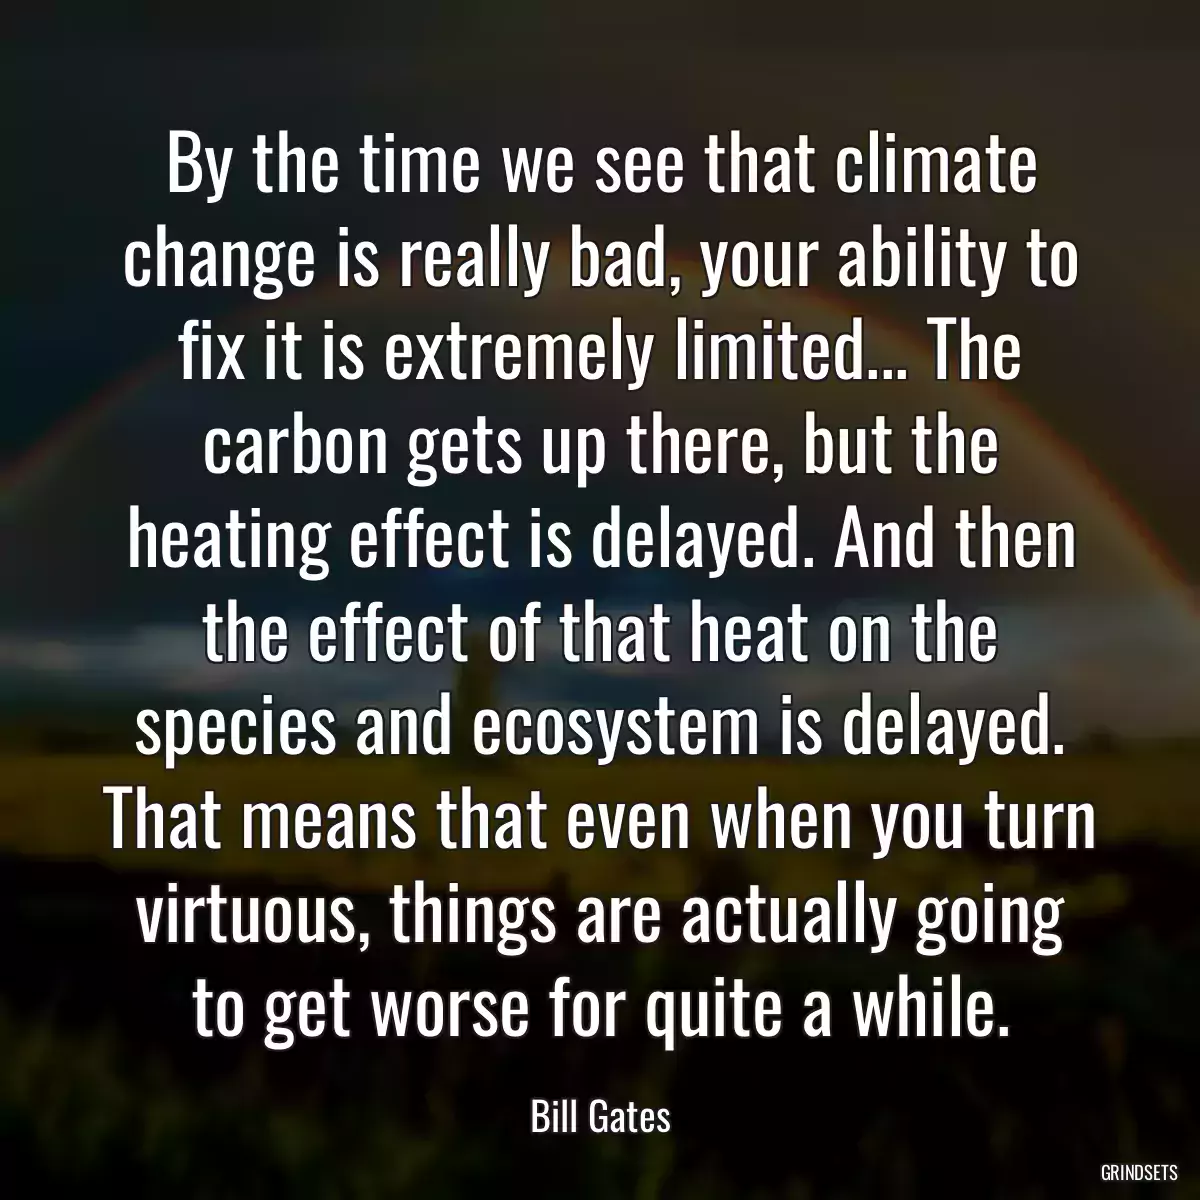 By the time we see that climate change is really bad, your ability to fix it is extremely limited... The carbon gets up there, but the heating effect is delayed. And then the effect of that heat on the species and ecosystem is delayed. That means that even when you turn virtuous, things are actually going to get worse for quite a while.